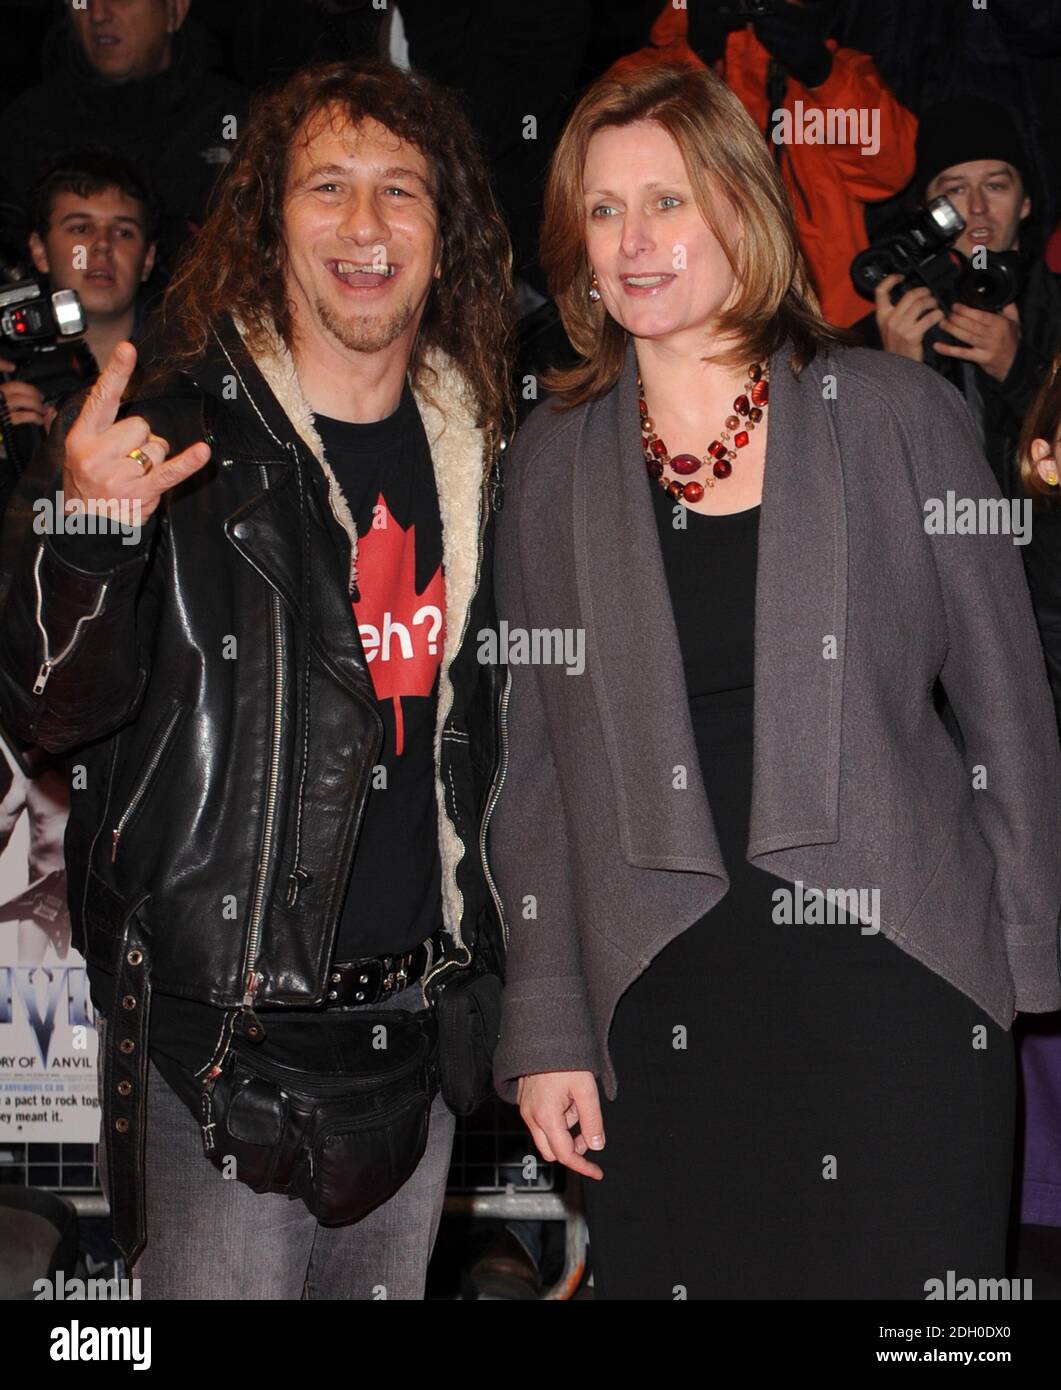 Sarah Brown with Steve Kudlow from the band Anvil arriving at the London Film Festival Screening of Anvil, Odeon West End Cinema, Leicester Square, London. Stock Photo